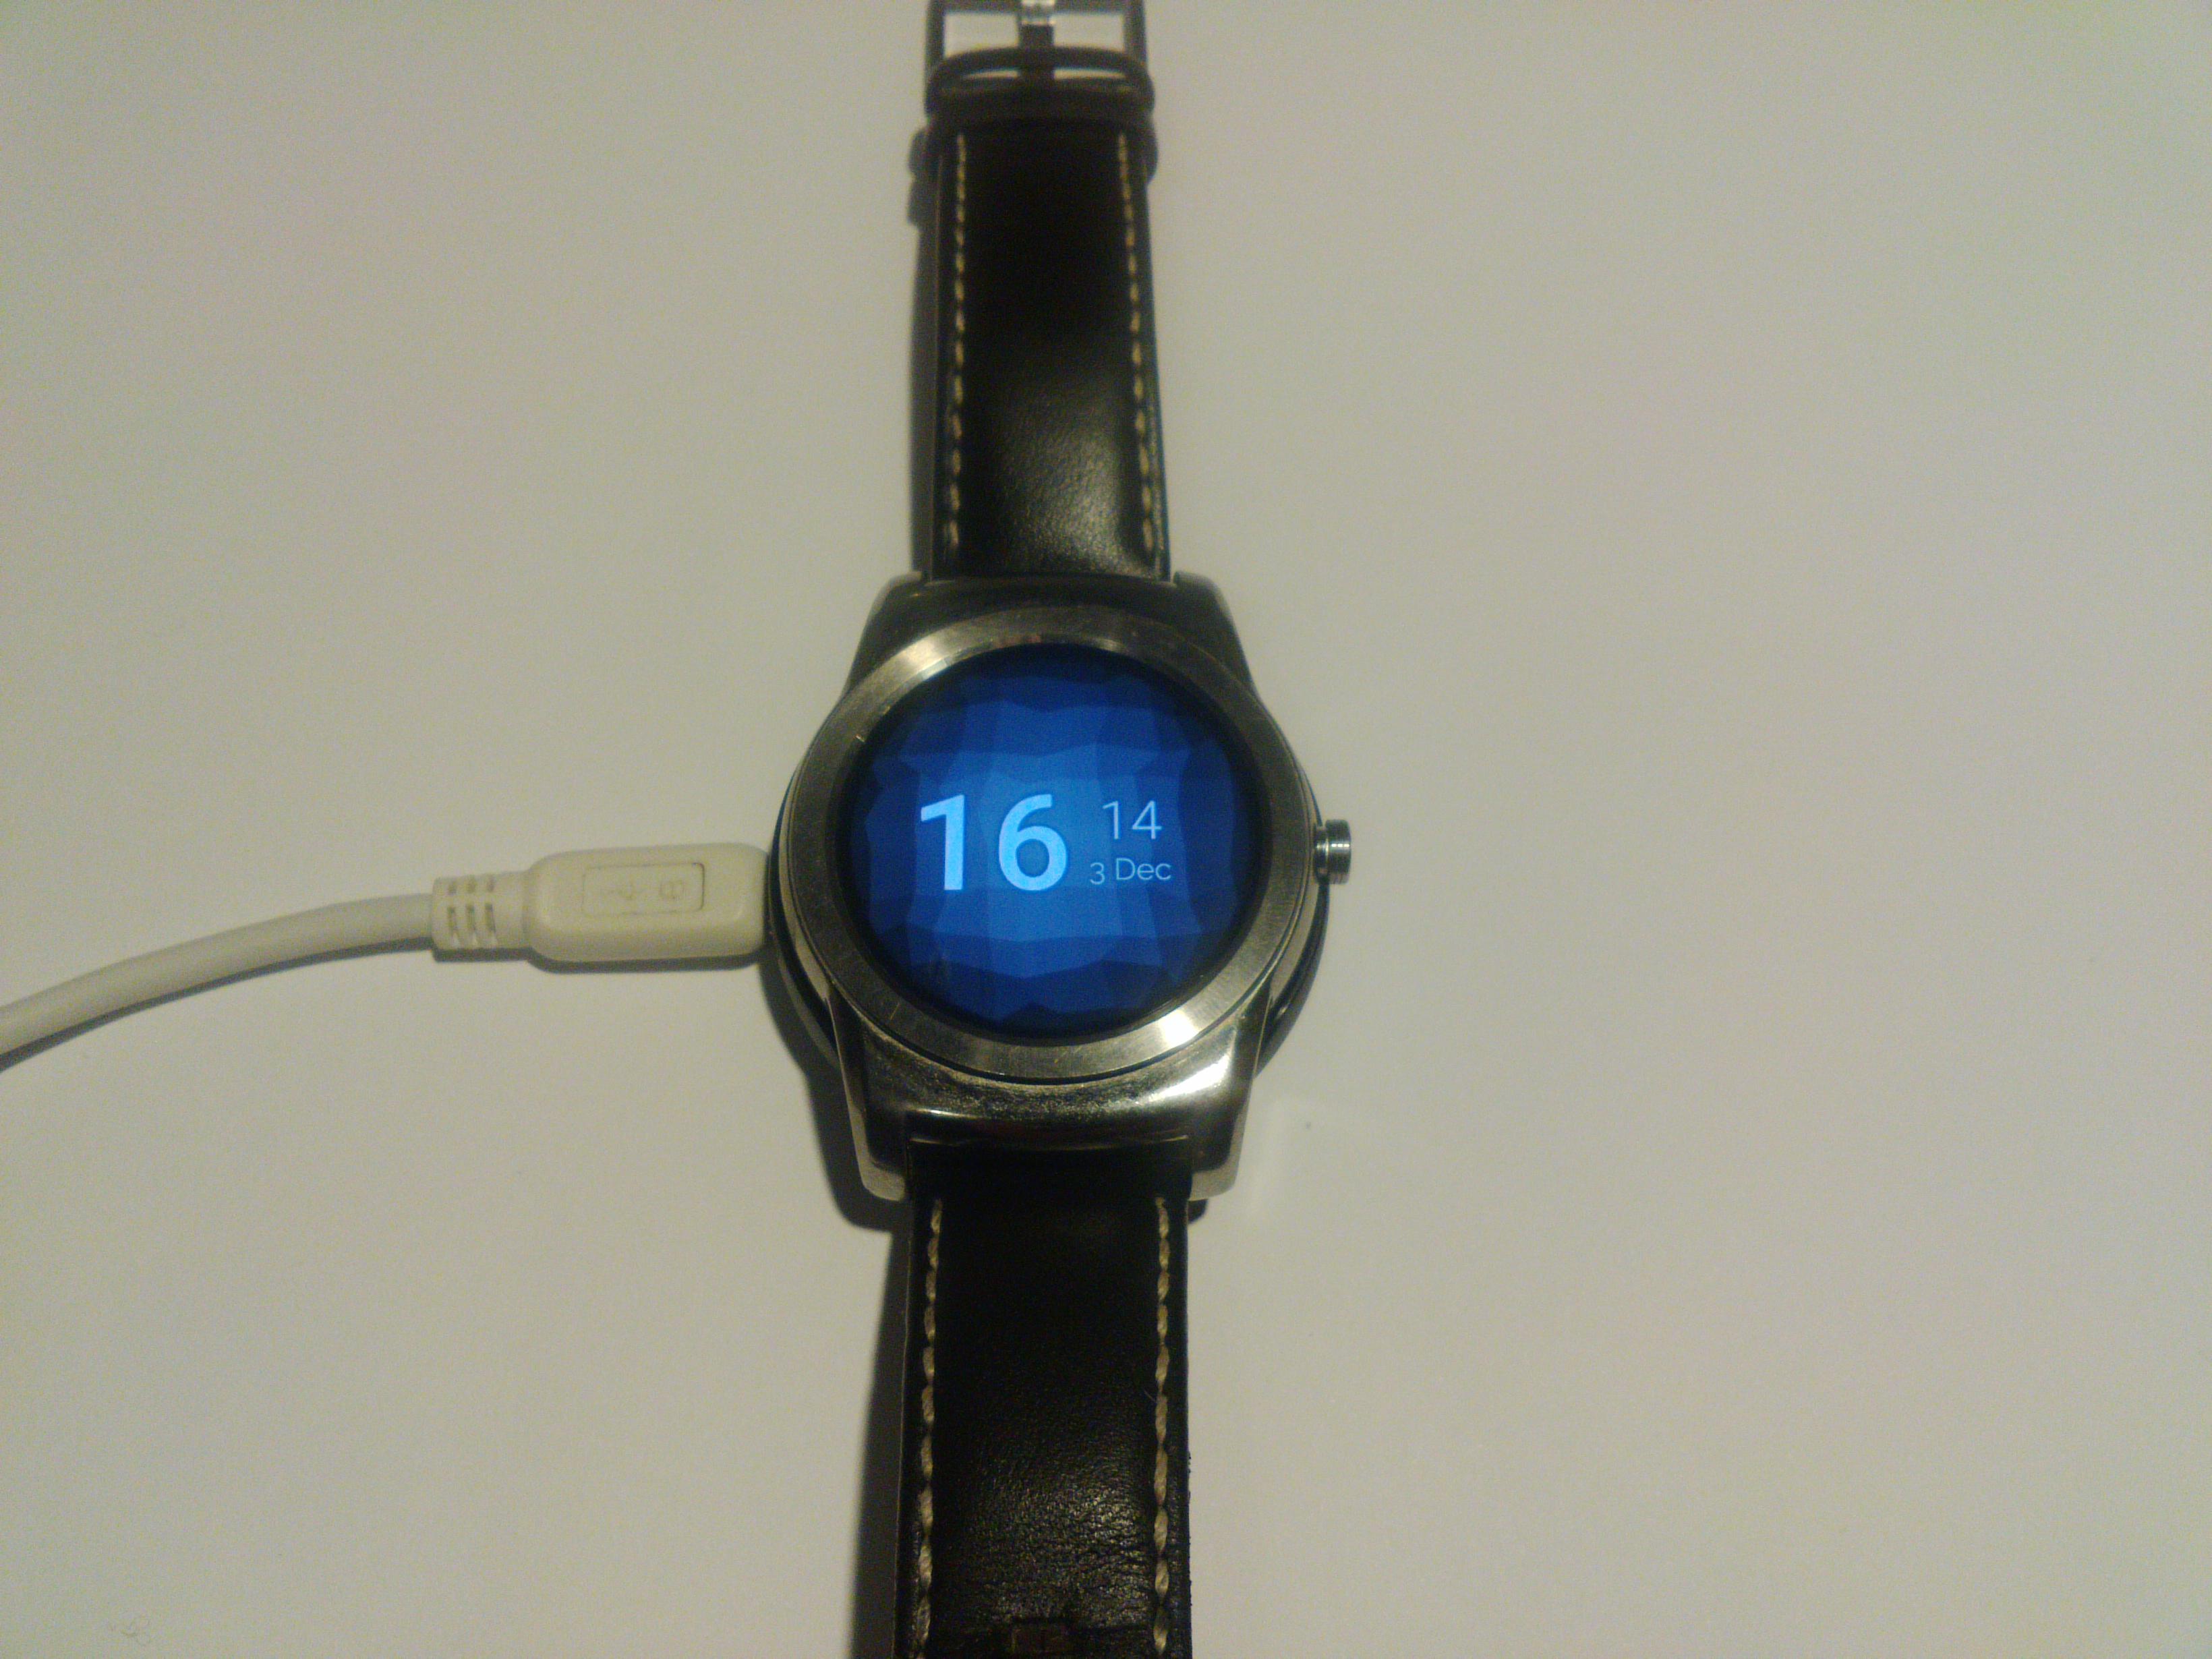 My watch in fastboot